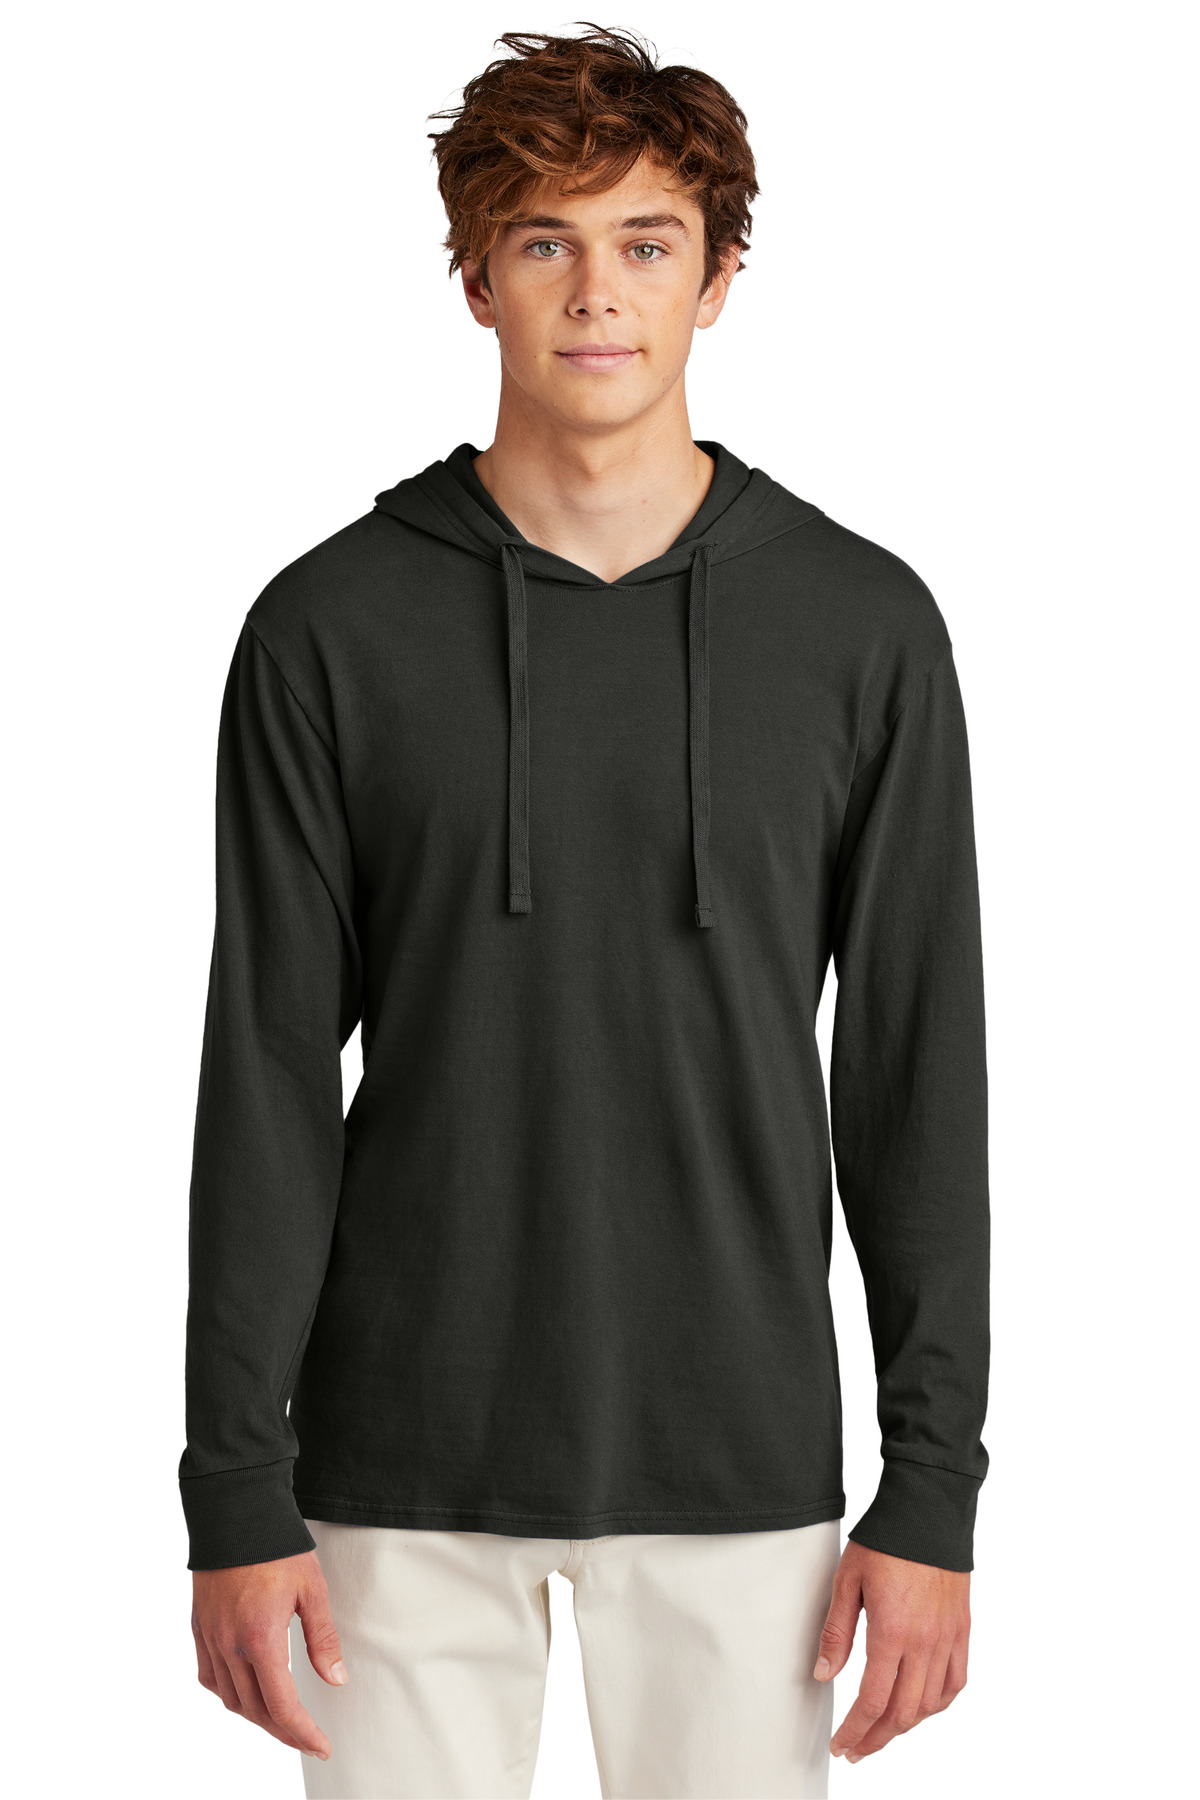 Port & Company Beach Wash Garment-Dyed Pullover Hooded T-Shirt PC099H